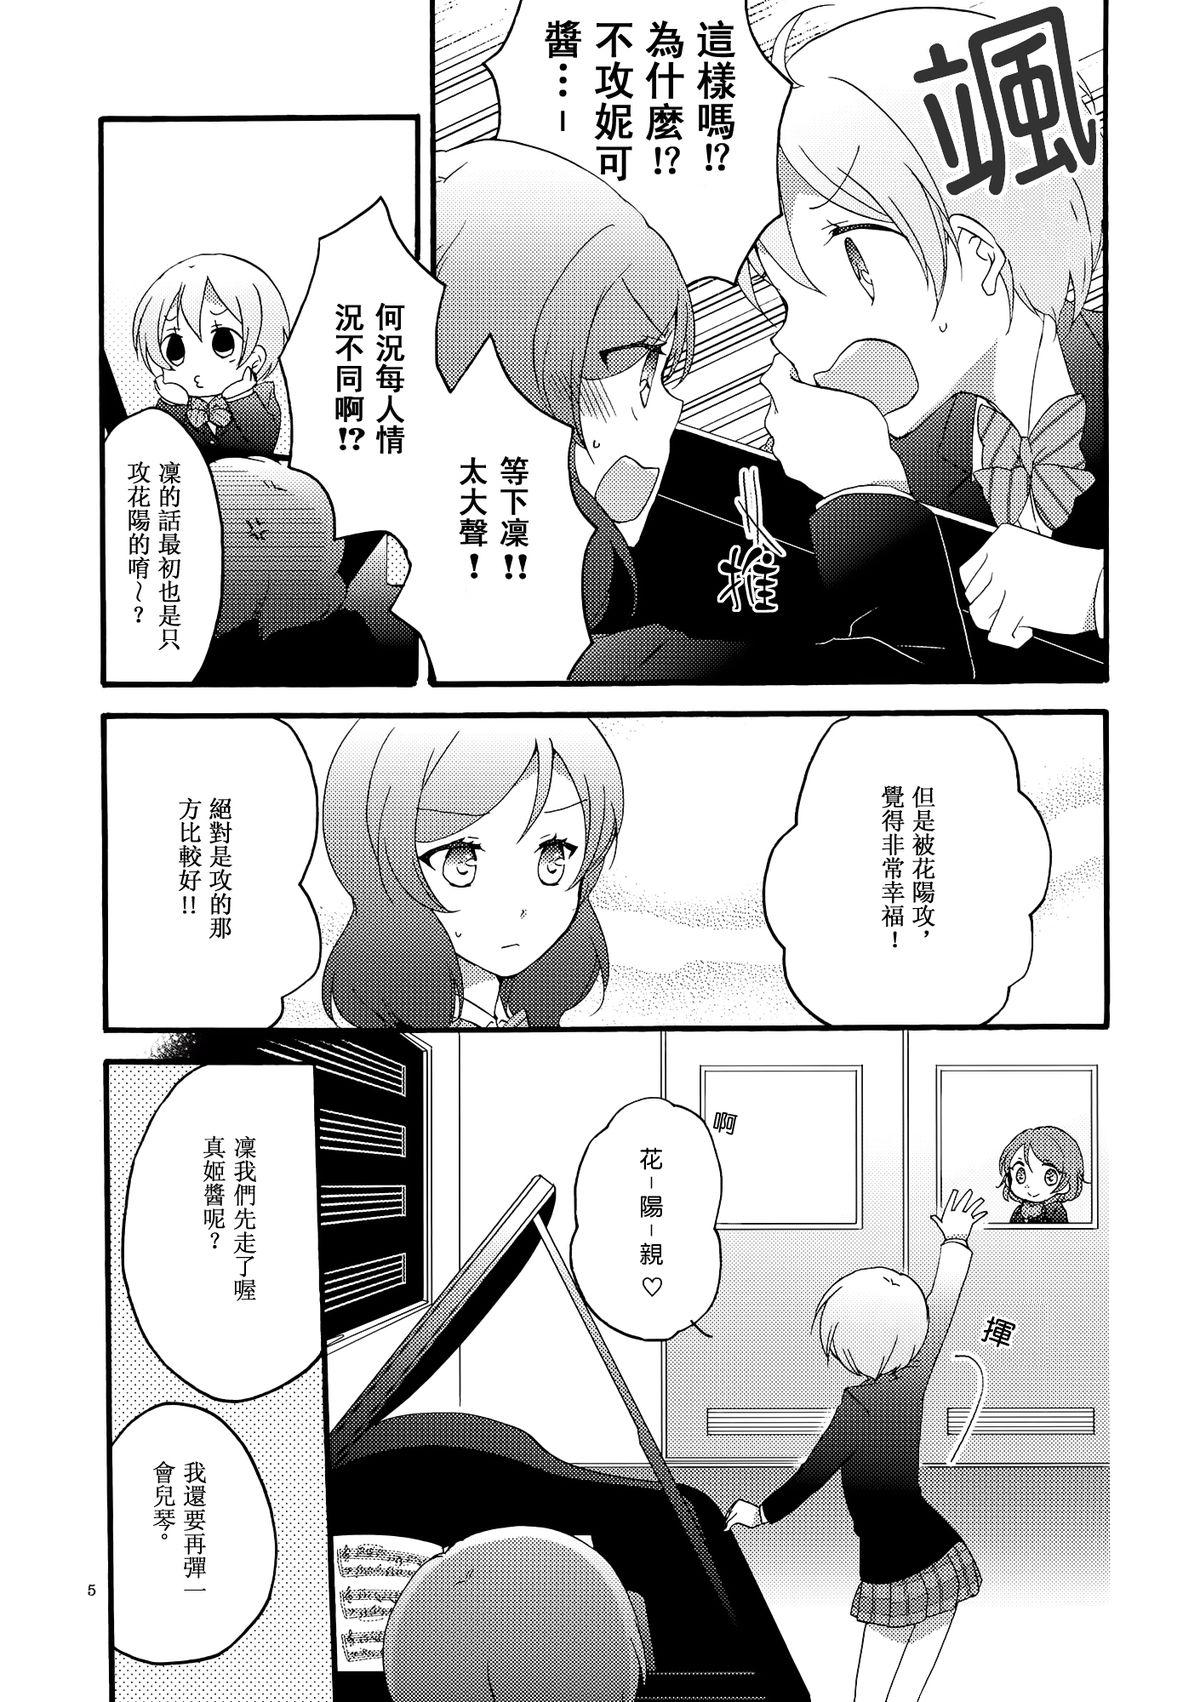 Viet Lovesick Girl - Love live Pack - Page 4